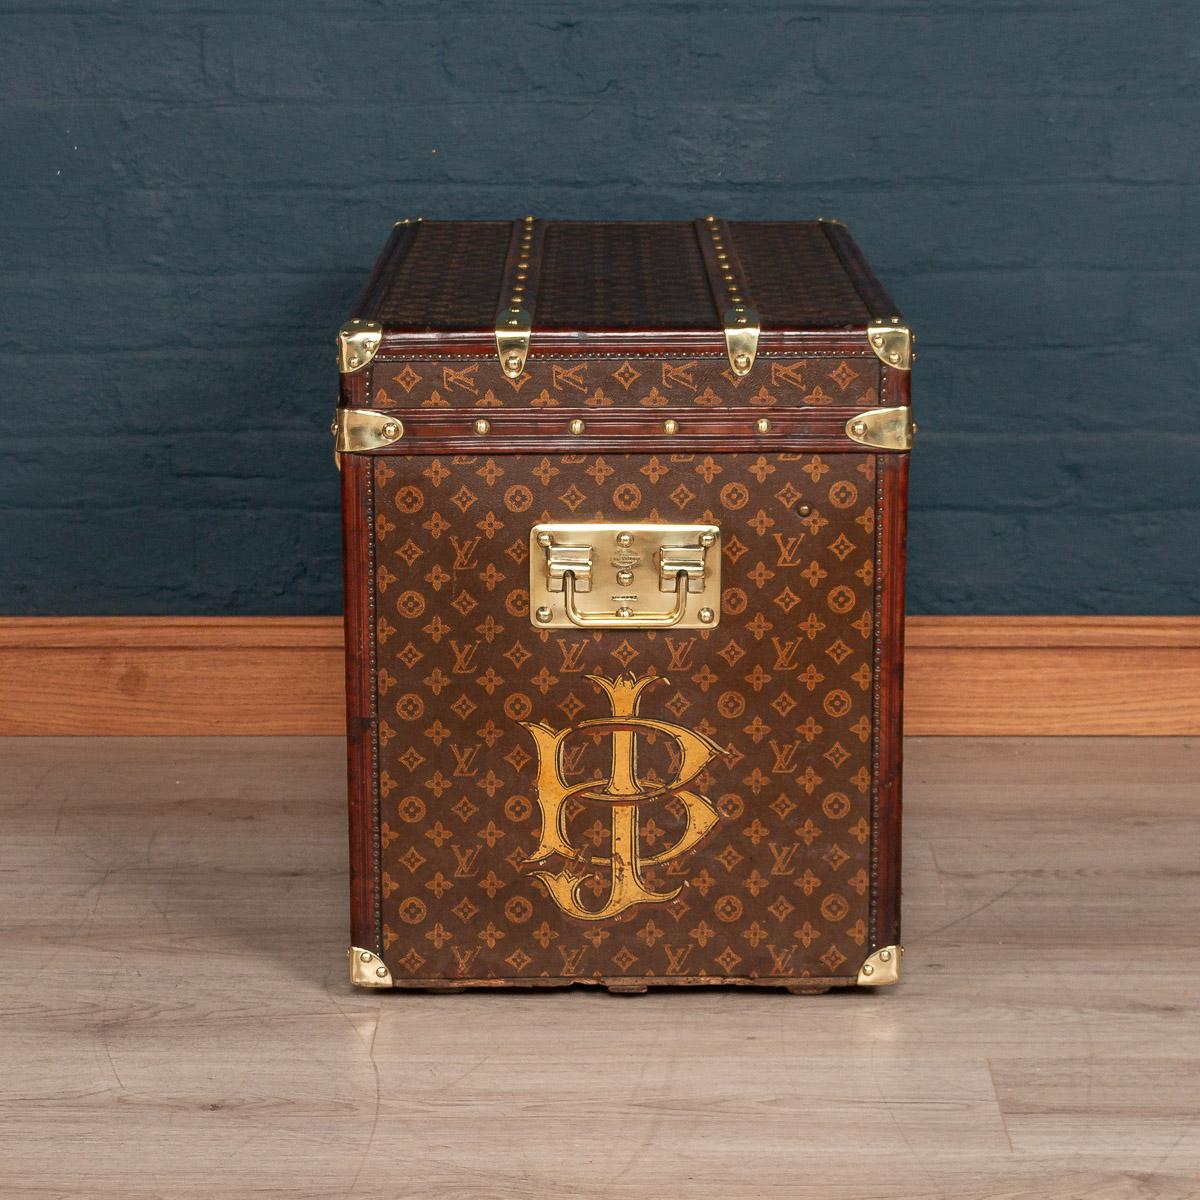 Antique 20th century stunning Louis Vuitton hat trunk in stencilled monogrammed canvas with leather and brass trim, France, circa 1910. This trunk is a must have item for any elite traveller harking back to times of passenger ships and 1st class